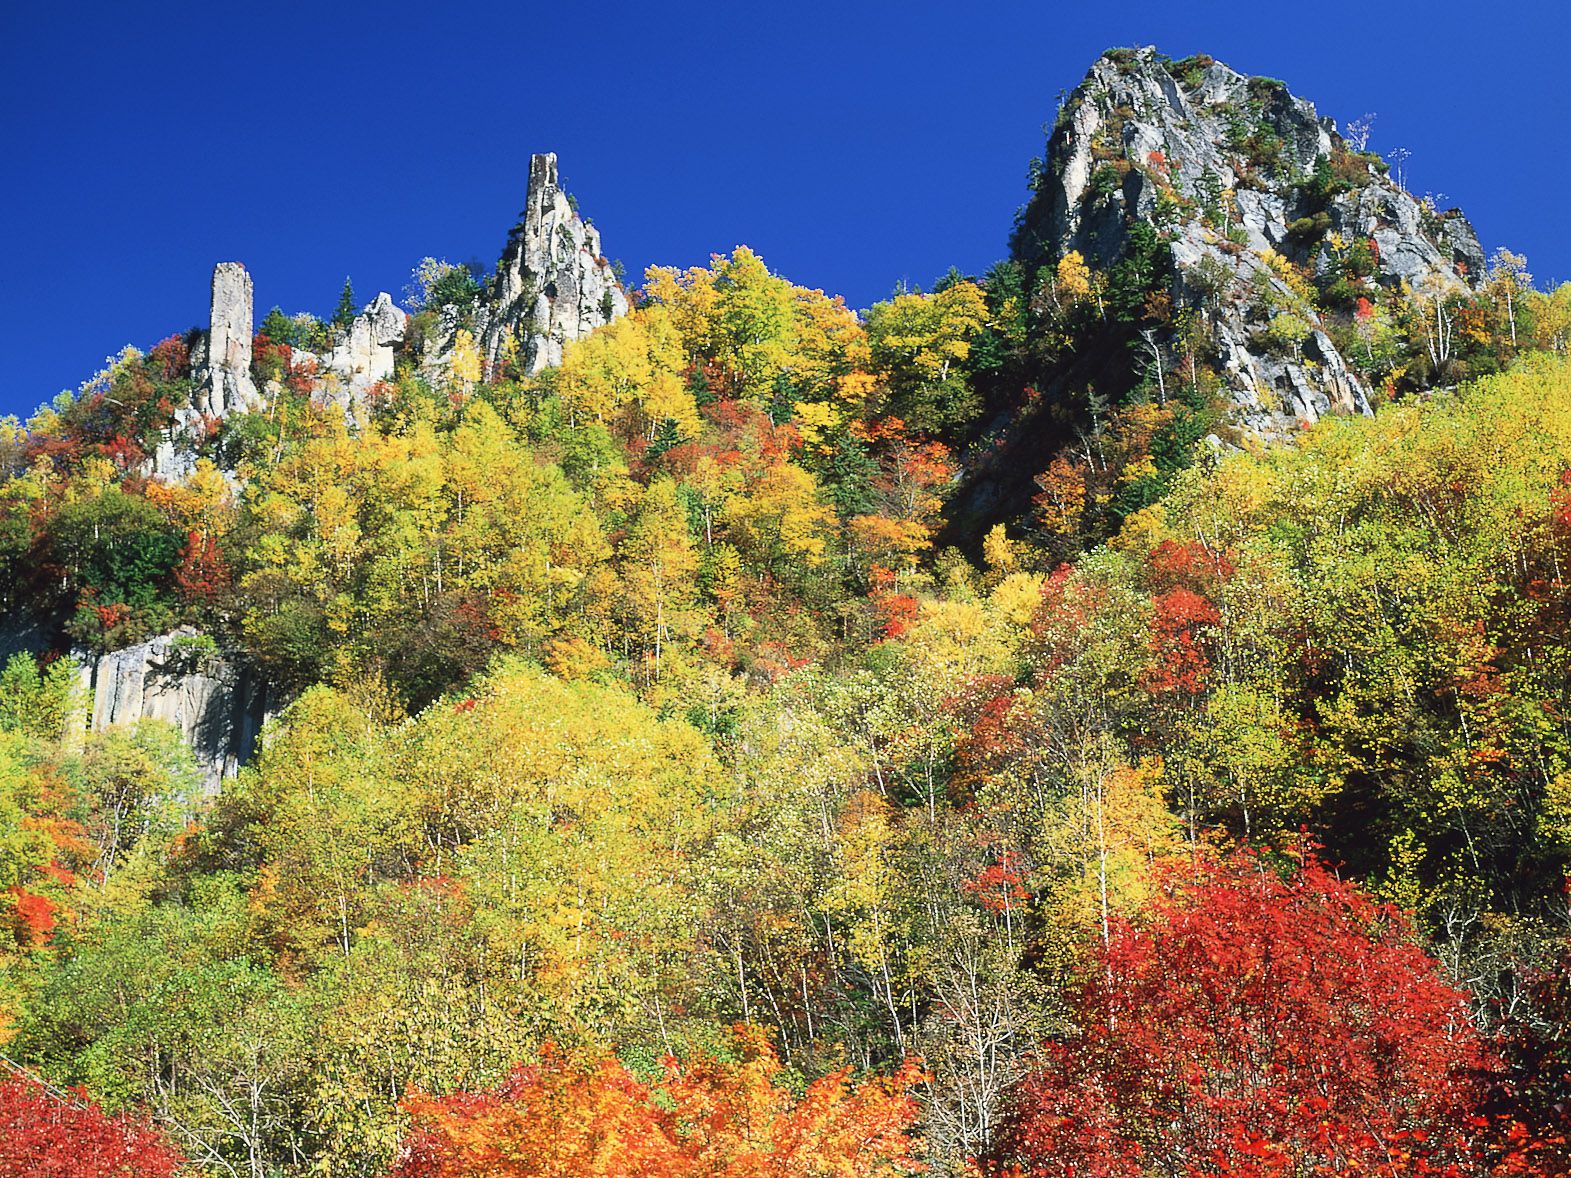 Be Sure to Visit the Best Places in Hokkaido to View the Autumn Foliage!